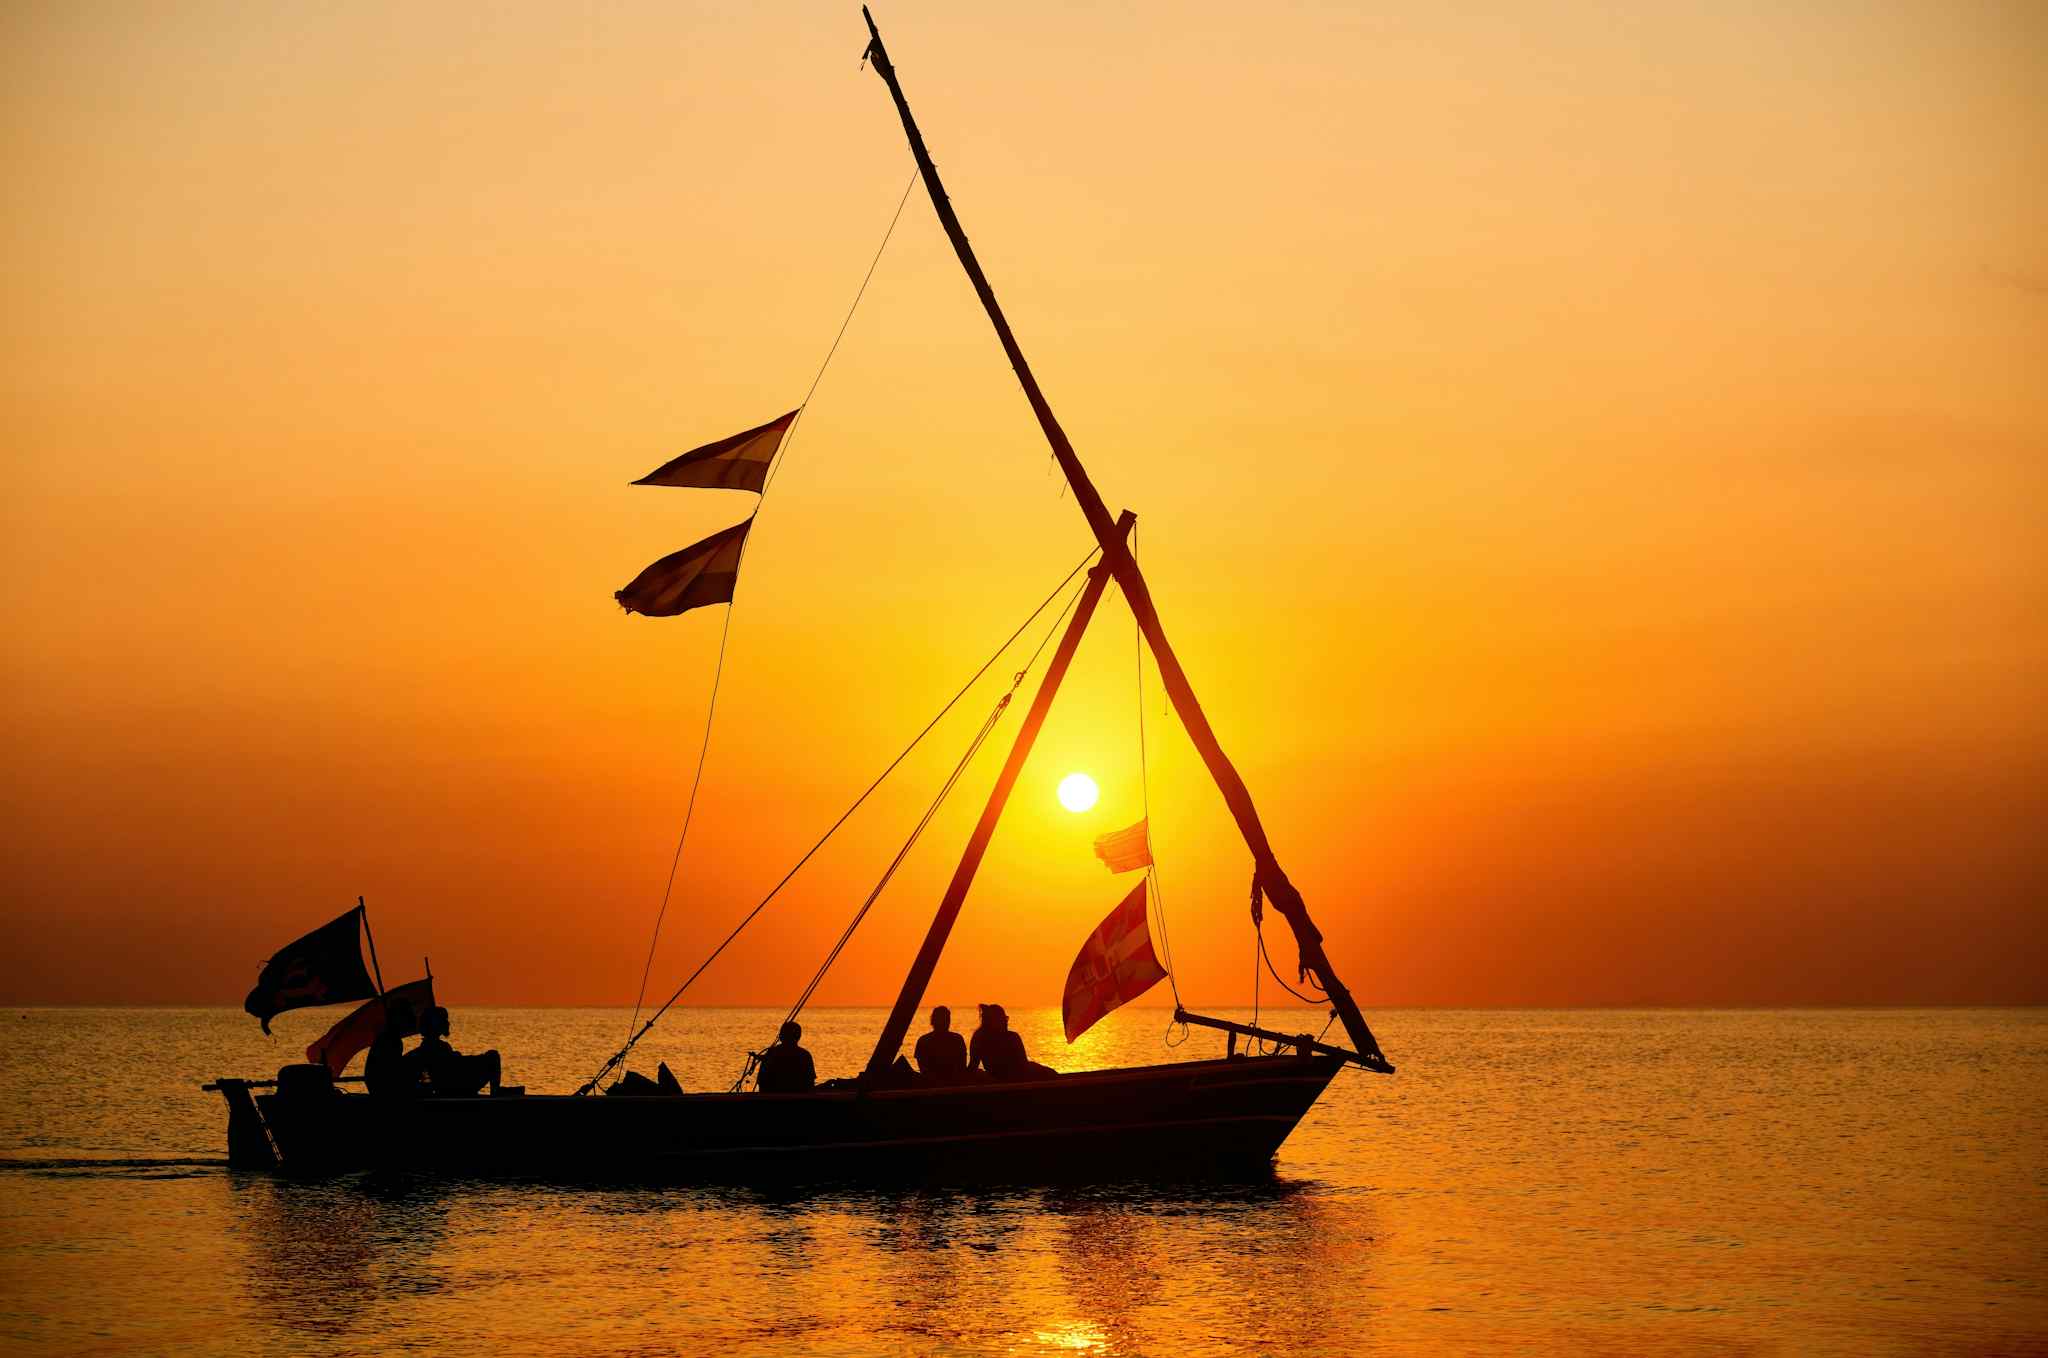 Silhouette of a boat on the ocean with orange sunset behind, Zanzibar.